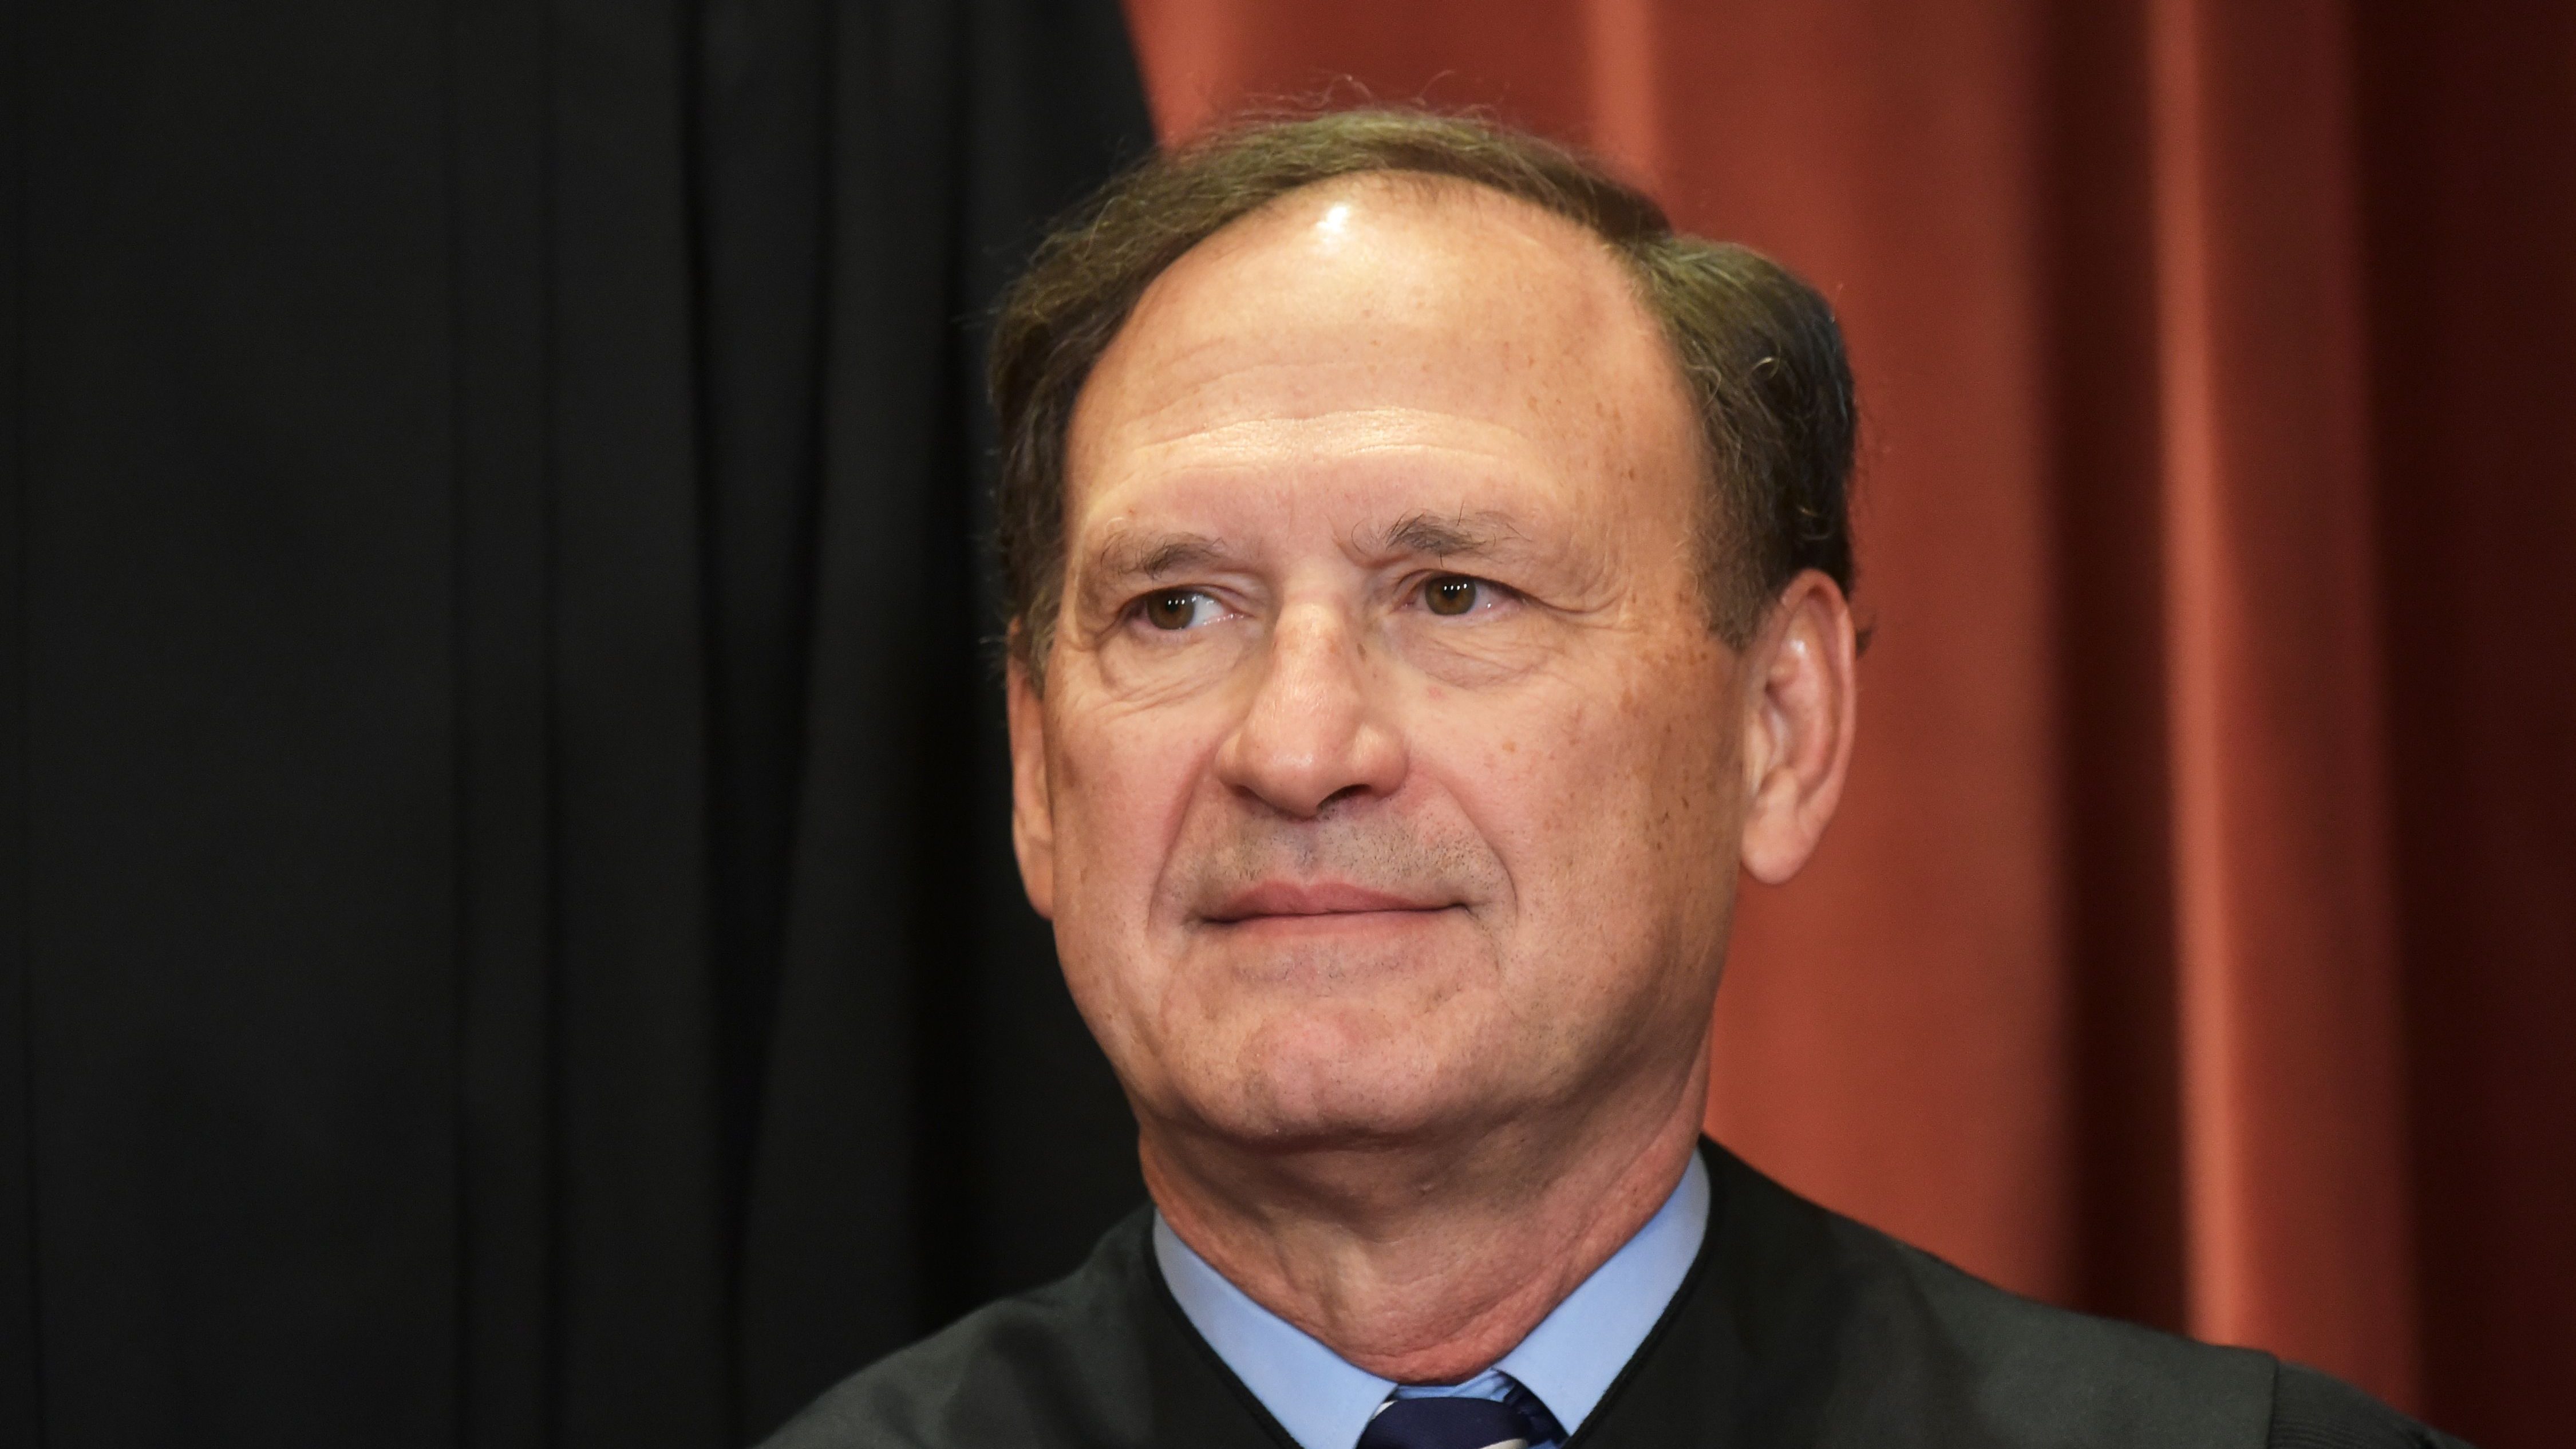 Justice Alito Says COVID Restrictions ‘Previously Unimaginable'